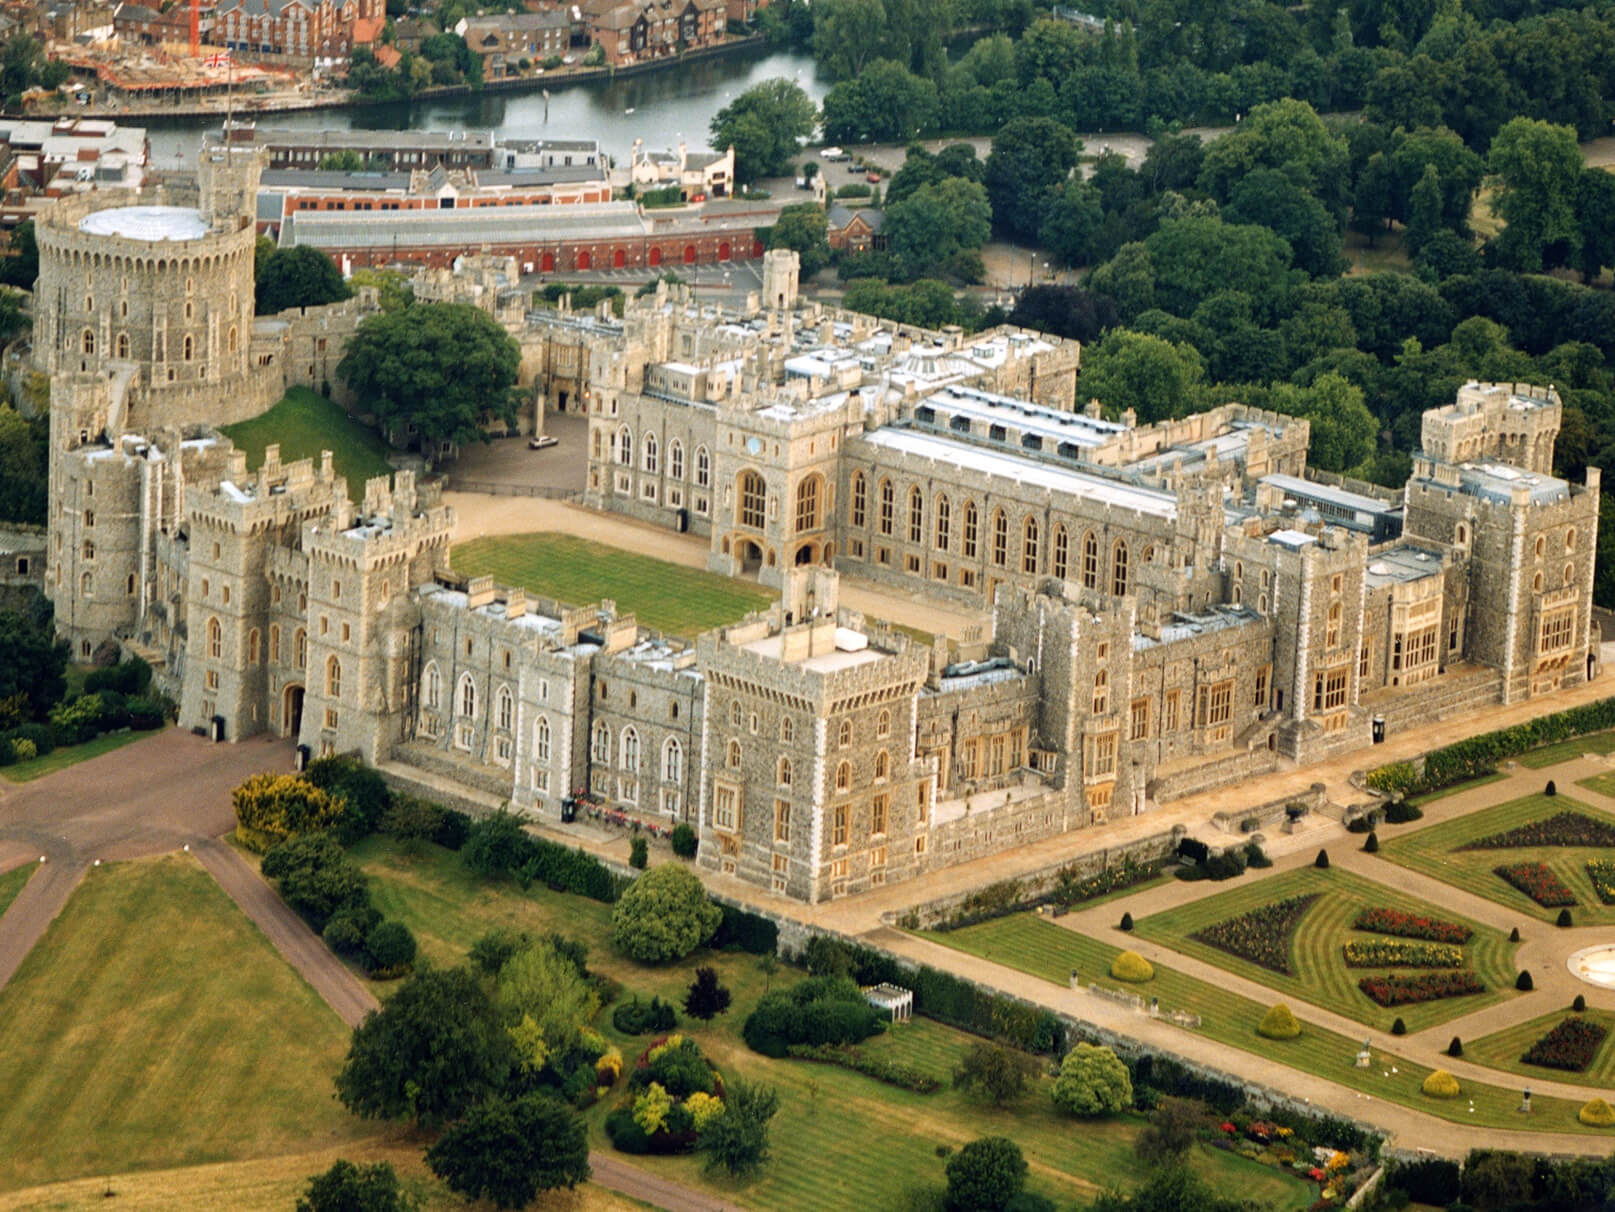 Image of Half-Day Tour to Windsor Castle from London